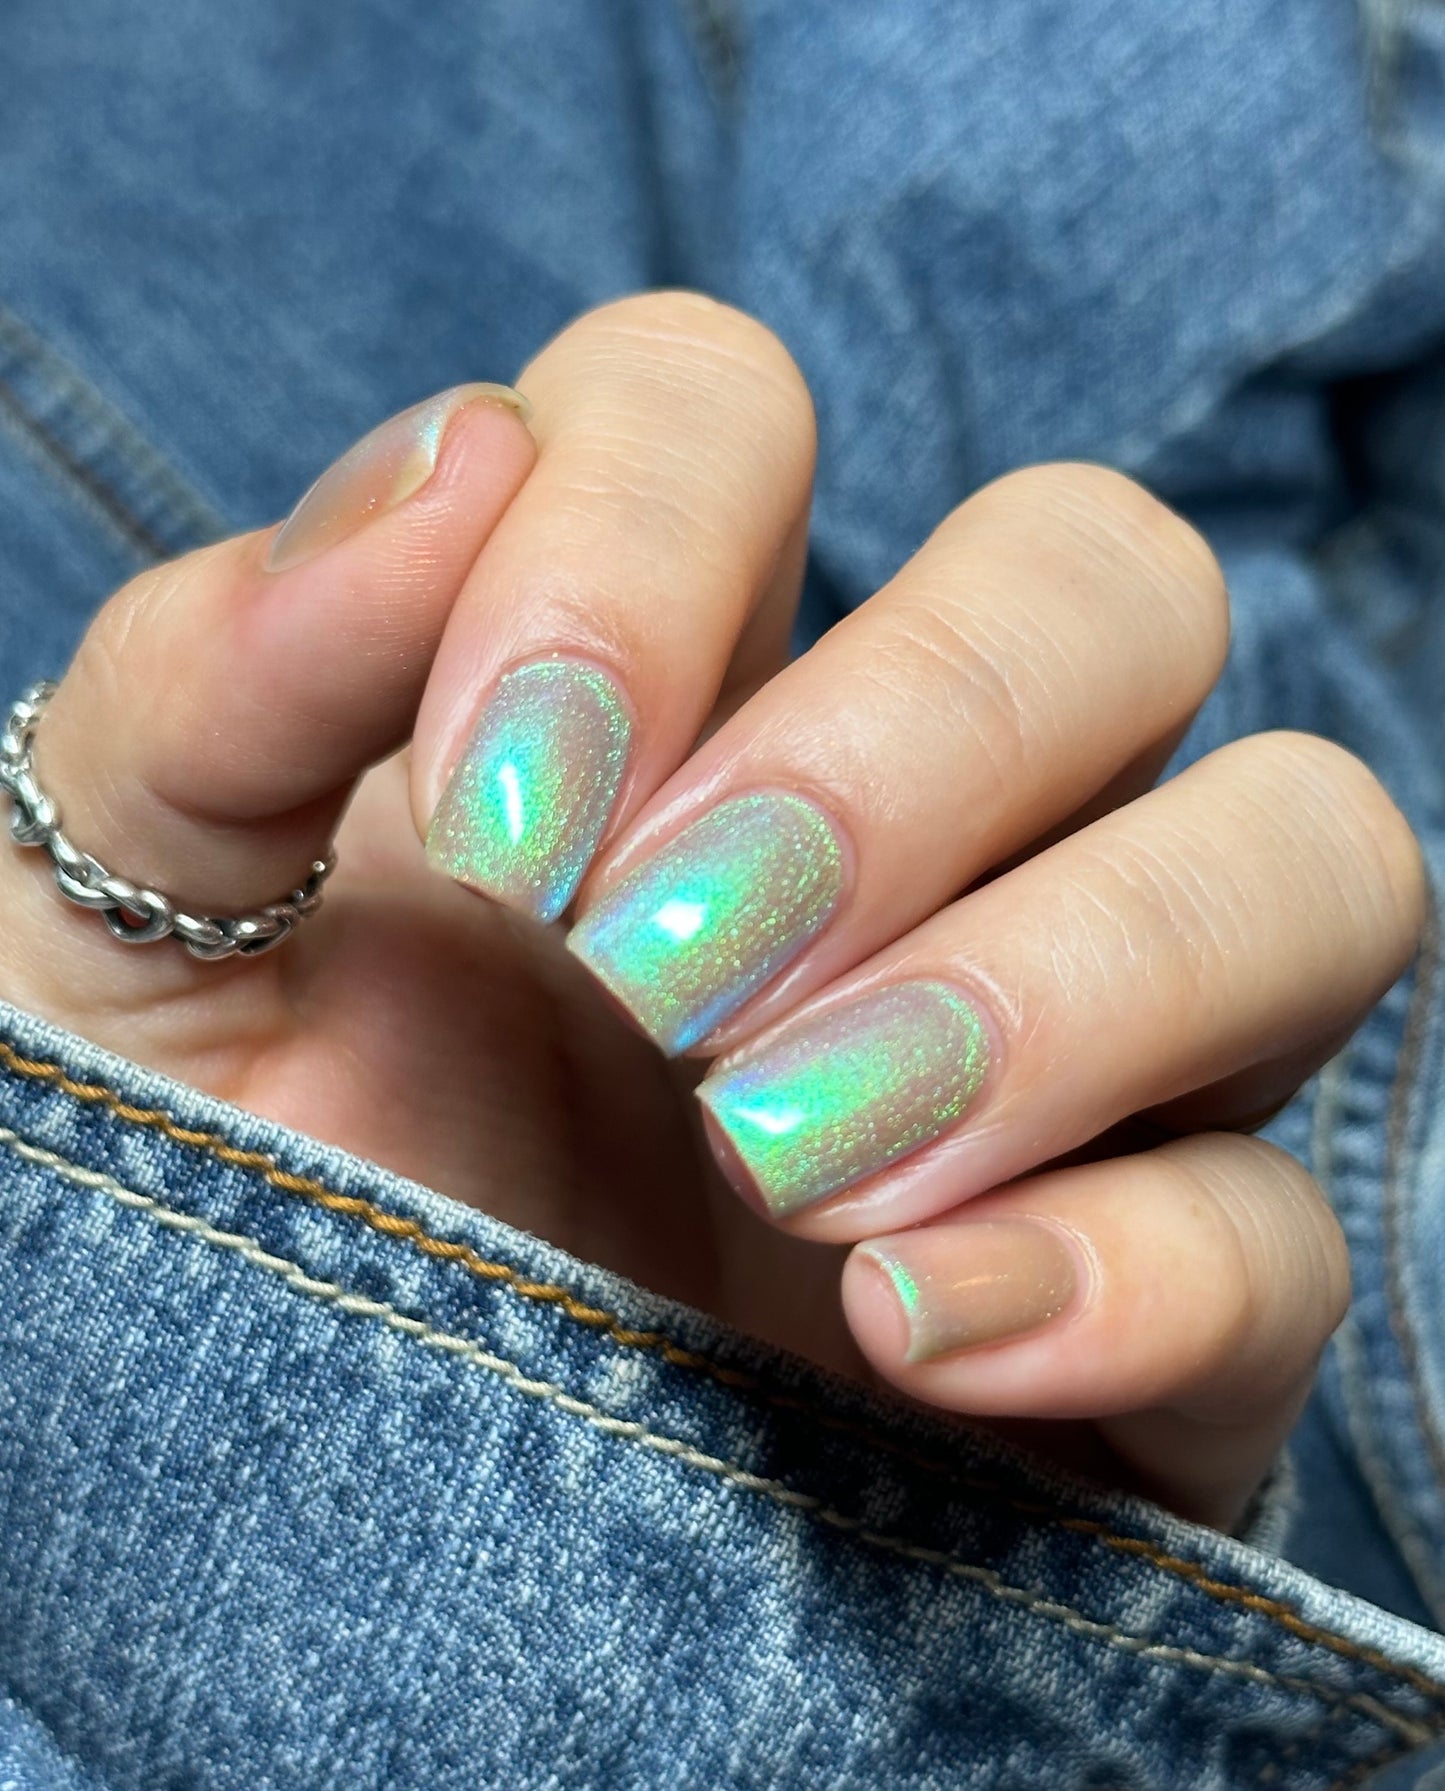 Get This Polish You Must - Green Shimmer Nail Polish - Trust the Shimmer Collection